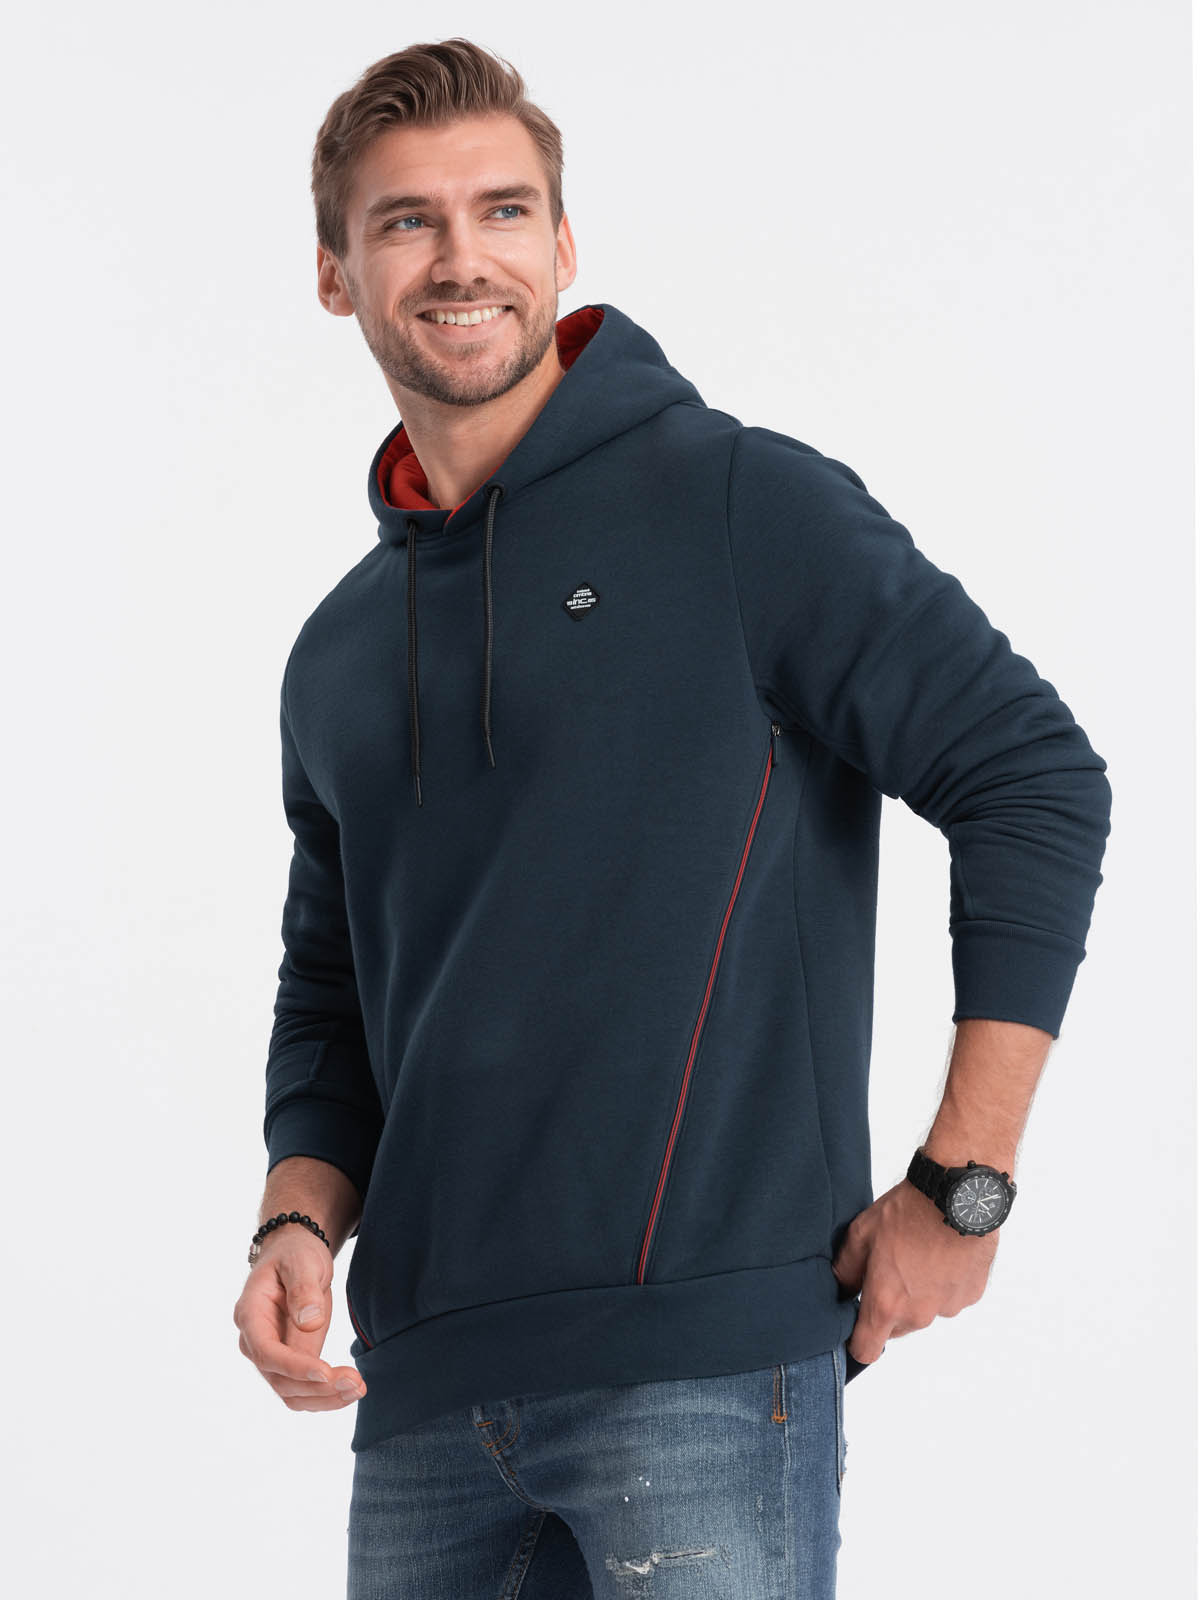 Men's hoodie with zippered pocket - navy blue V1 OM-SSNZ-22FW-006 ...